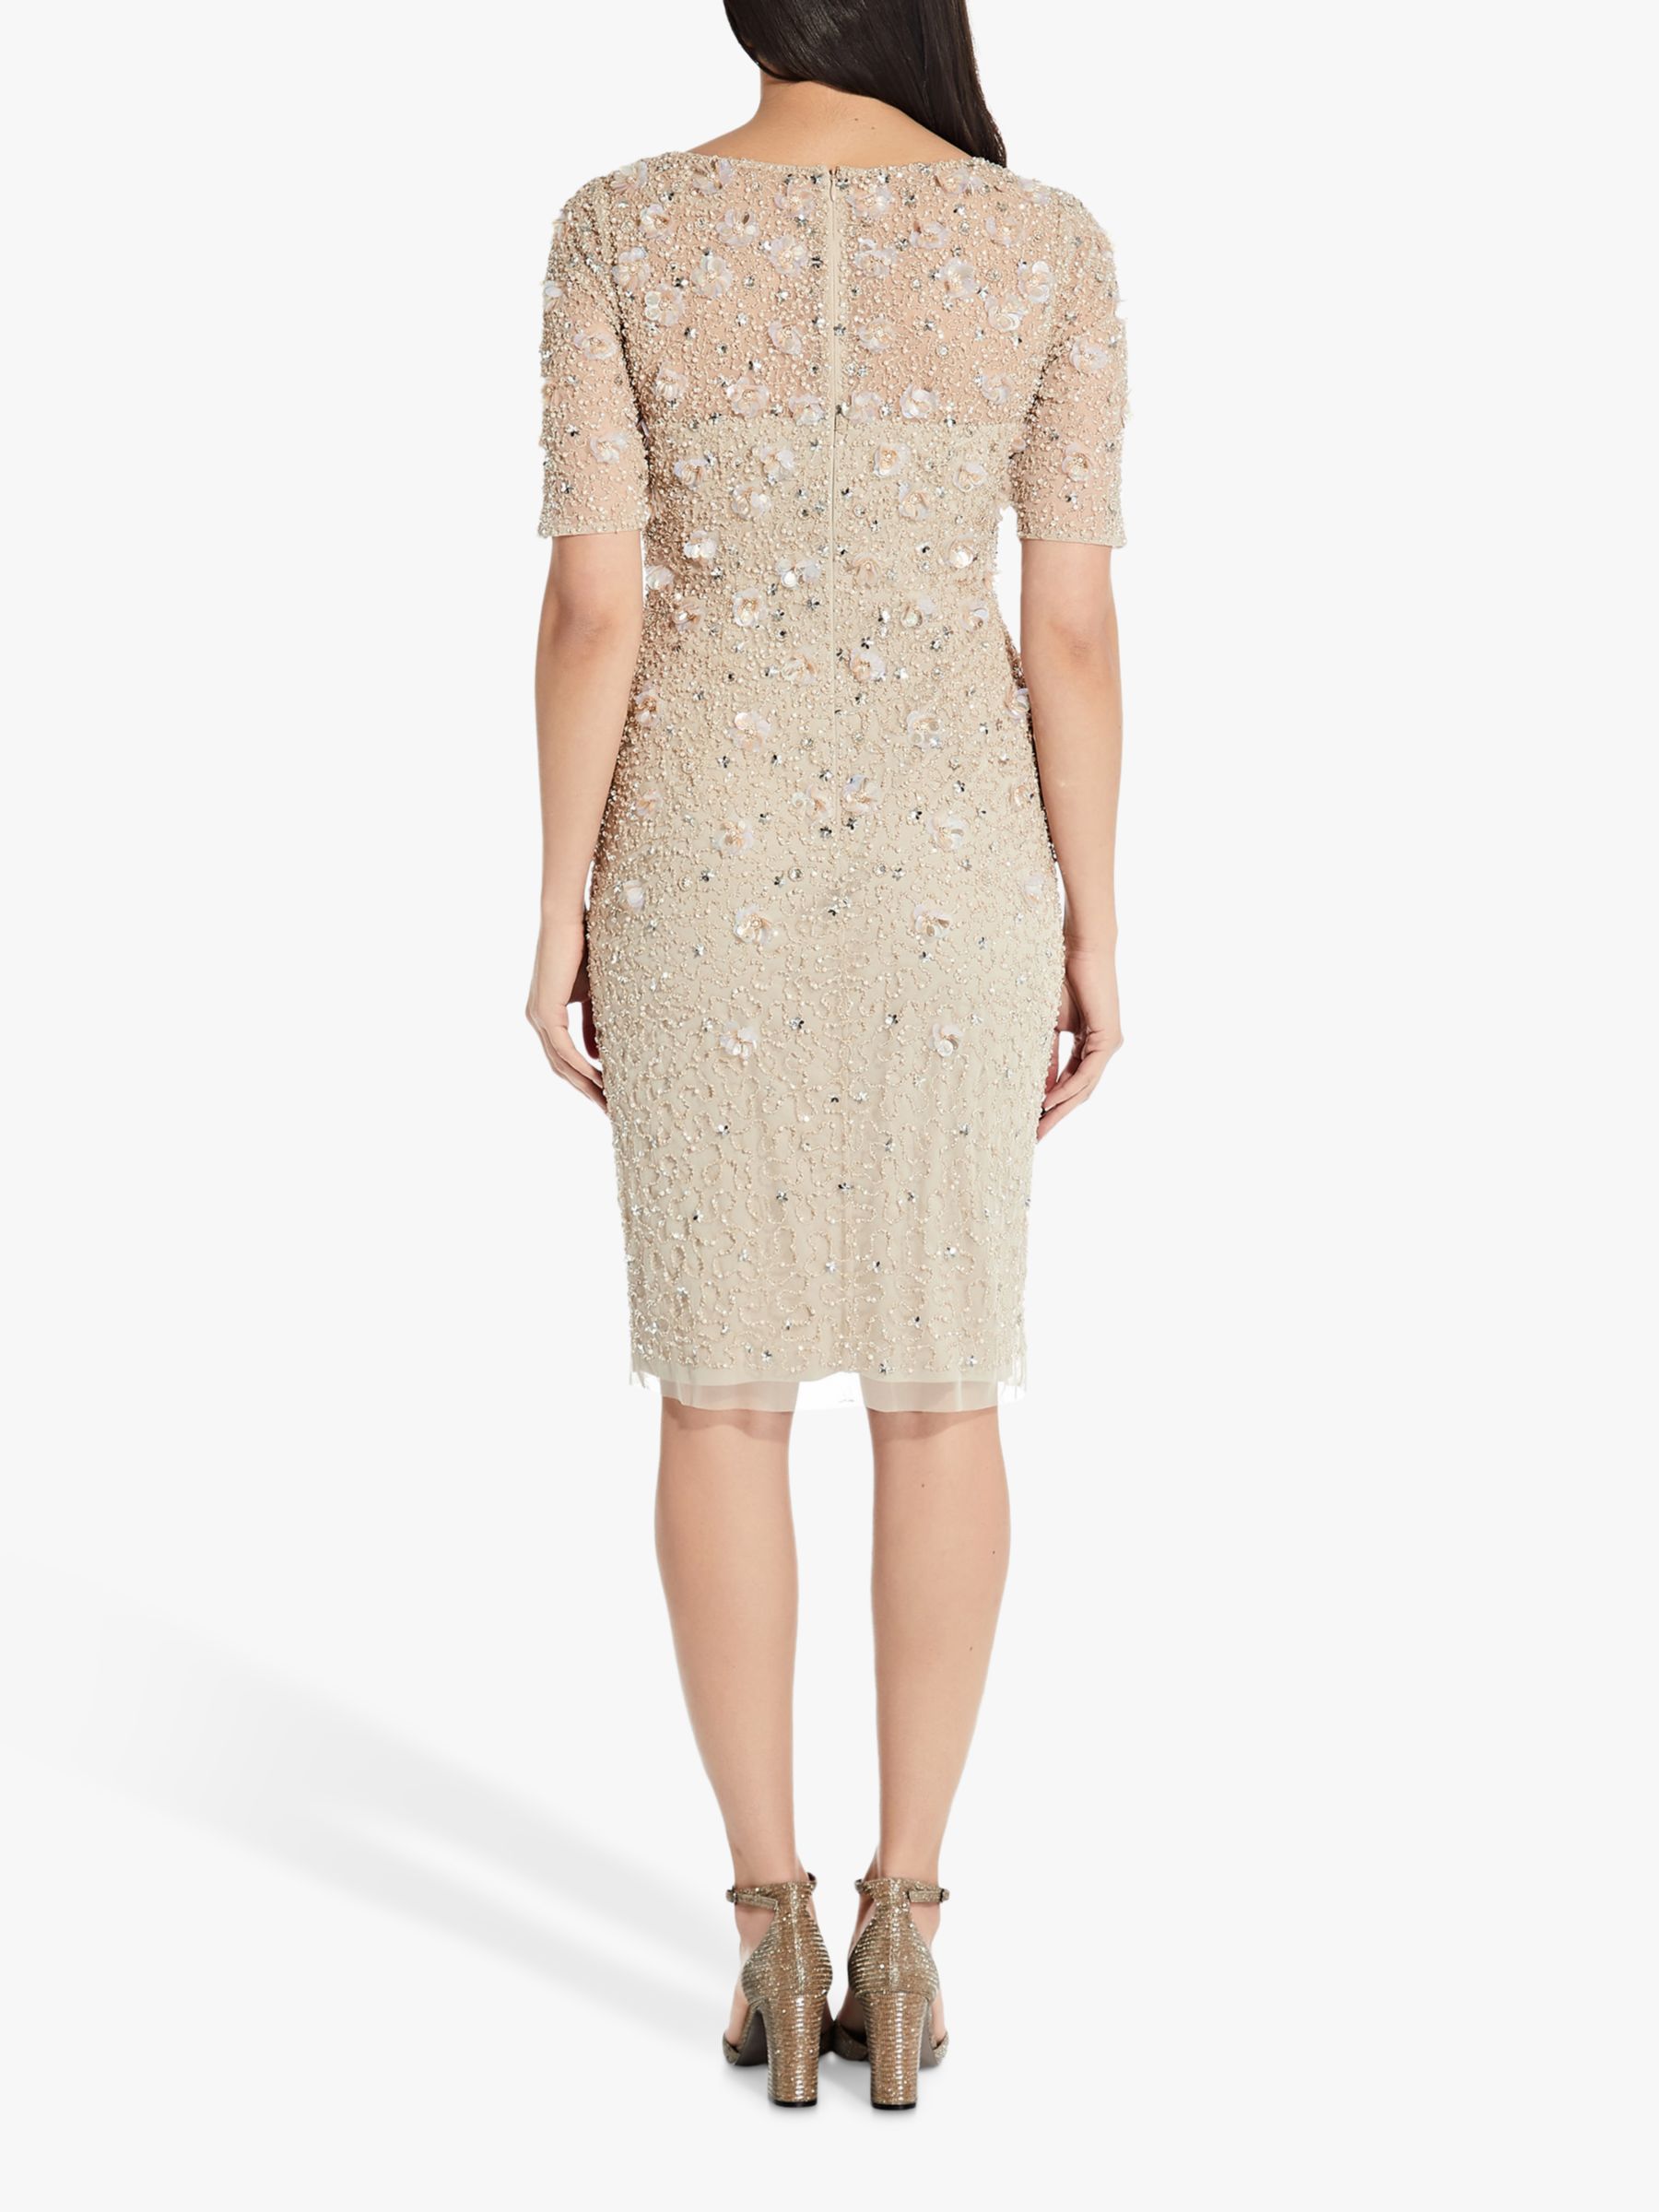 Adrianna Papell Beaded Cocktail Knee Length Dress, Biscotti at John ...